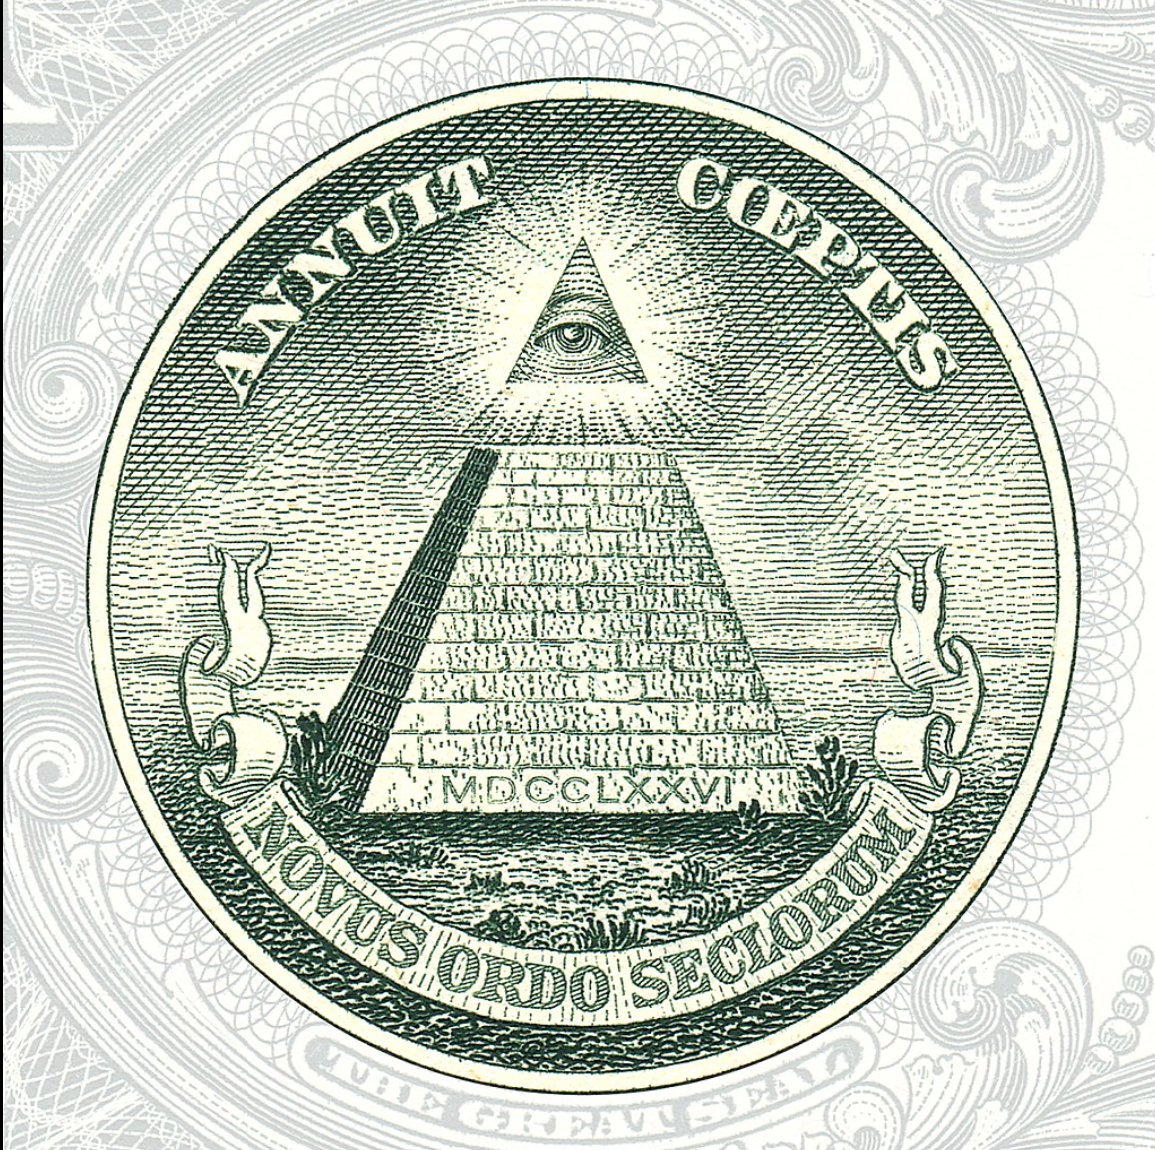 57. First and foremost is actually a group of related symbols. These are the All Seeing Eye, the Triangle and the Letter G. The Eye in the Triangle is well known from the Great Seal of the United States, which is featured on the Dollar Bill.